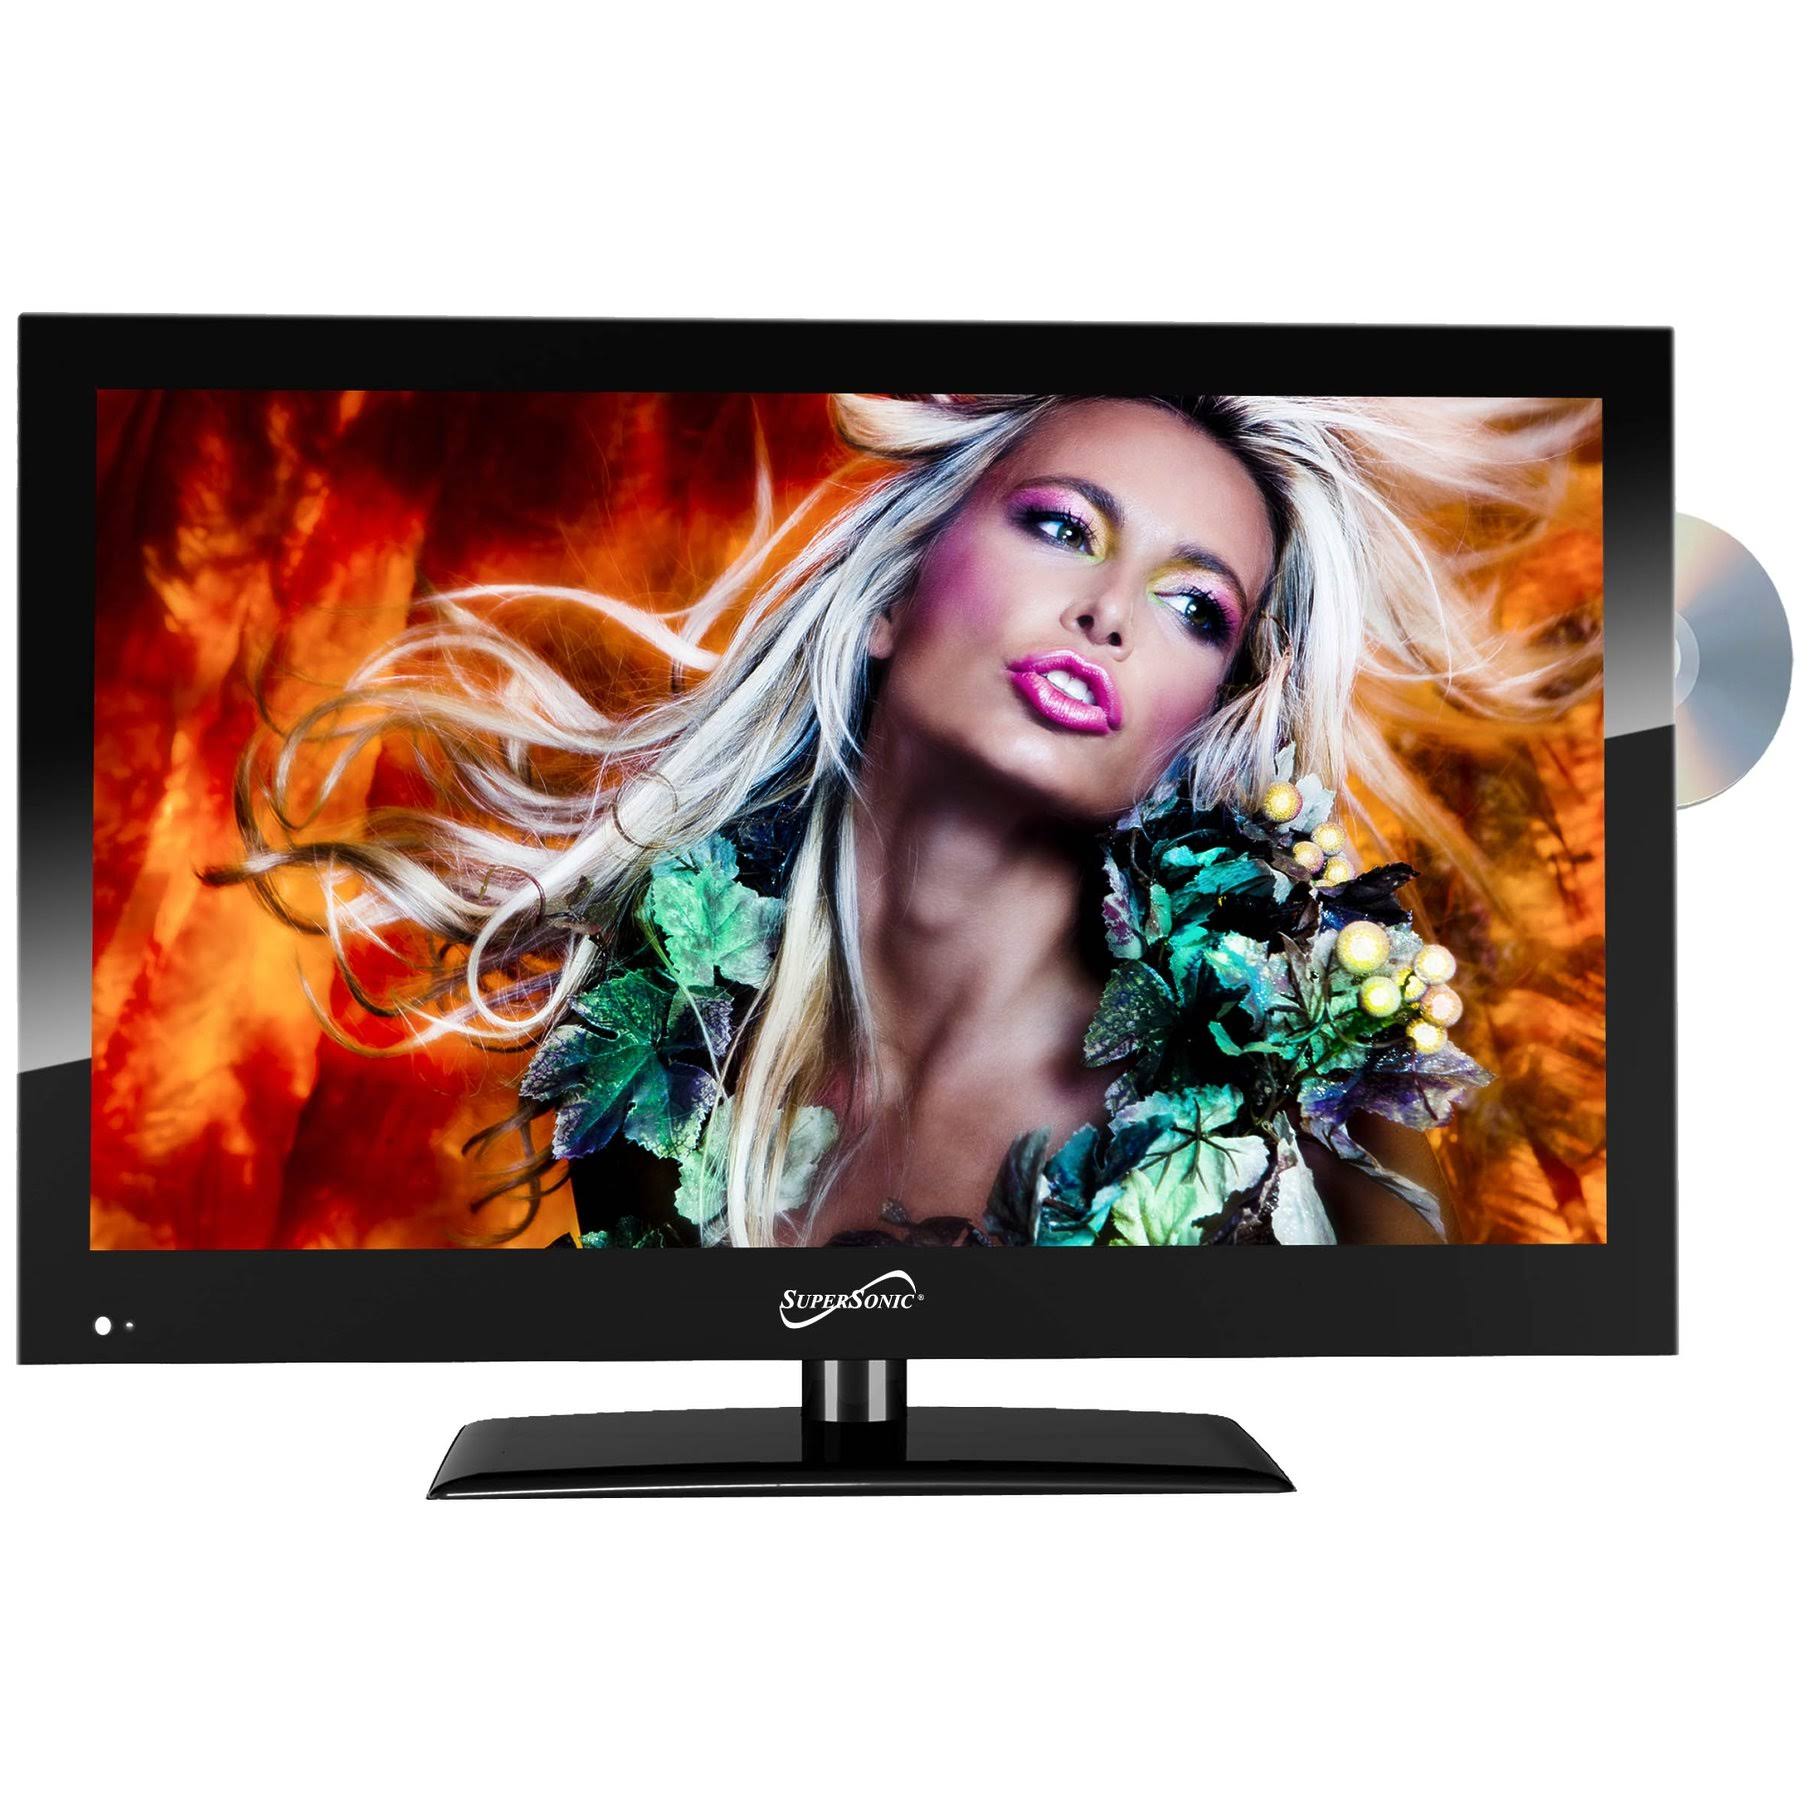 Supersonic 19" 720p LED with DVD SC-1912